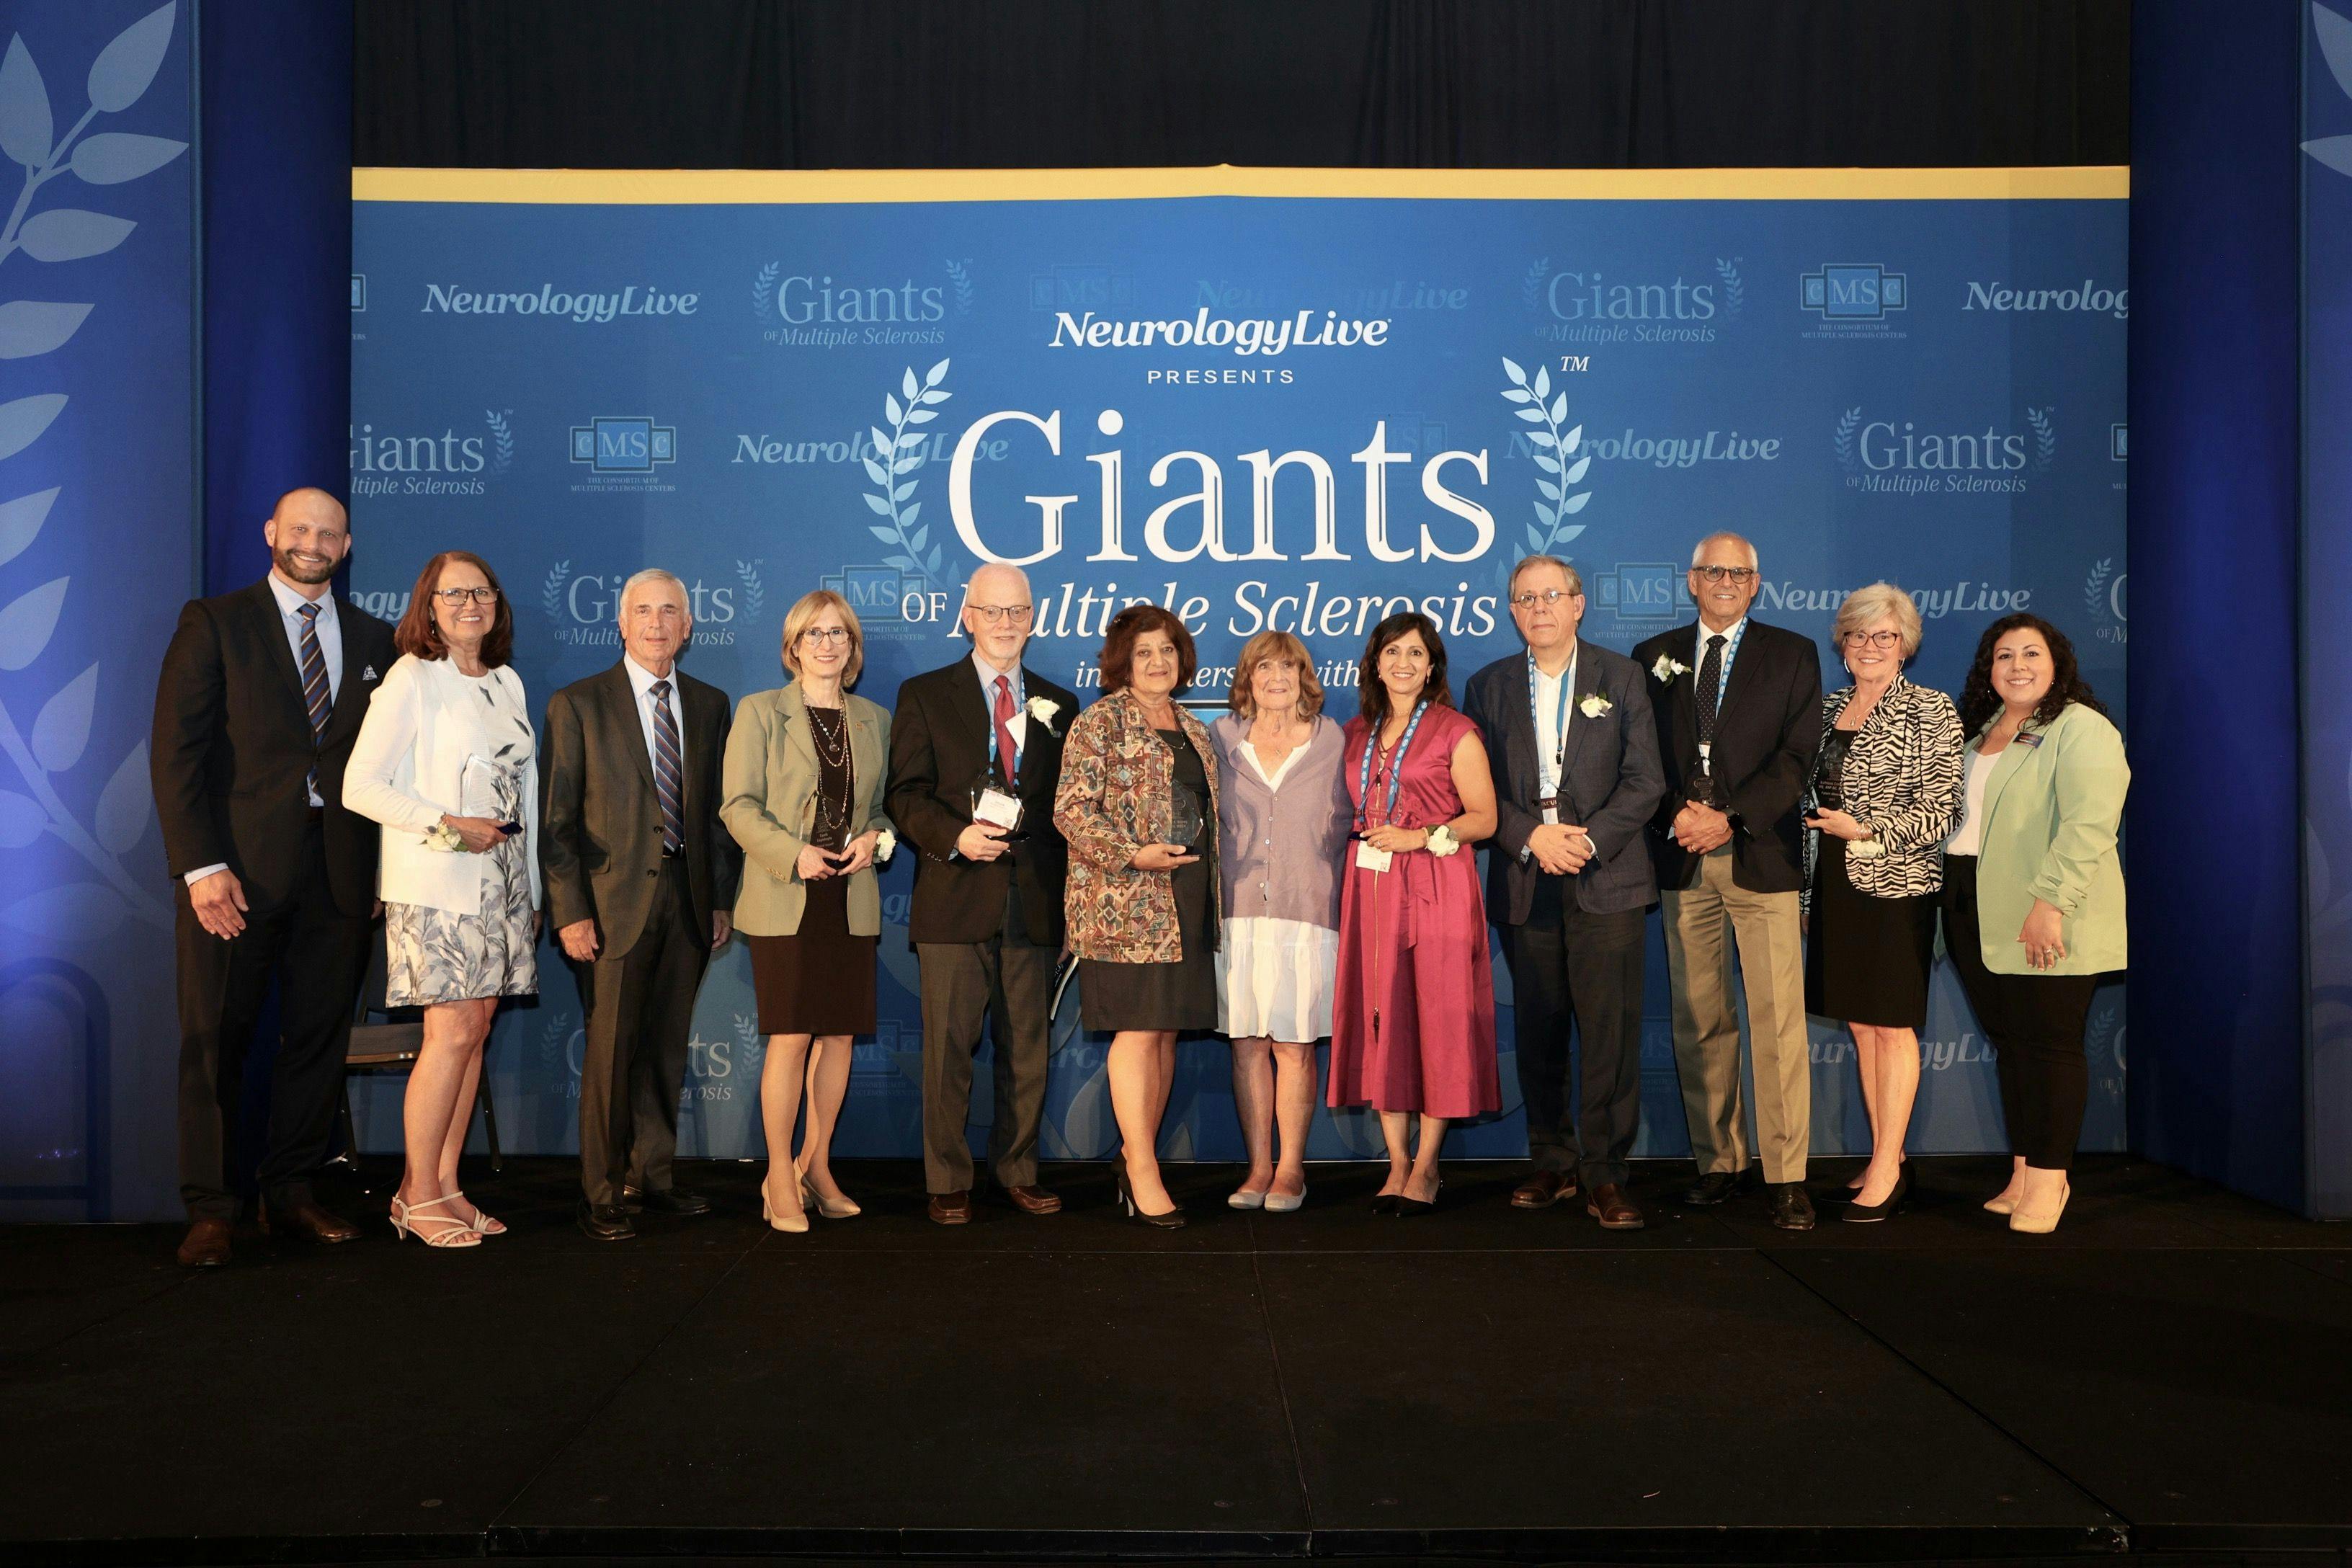 The 2023 class of Giants of Multiple Scleorsis
Image courtesy: Shmulik Almany